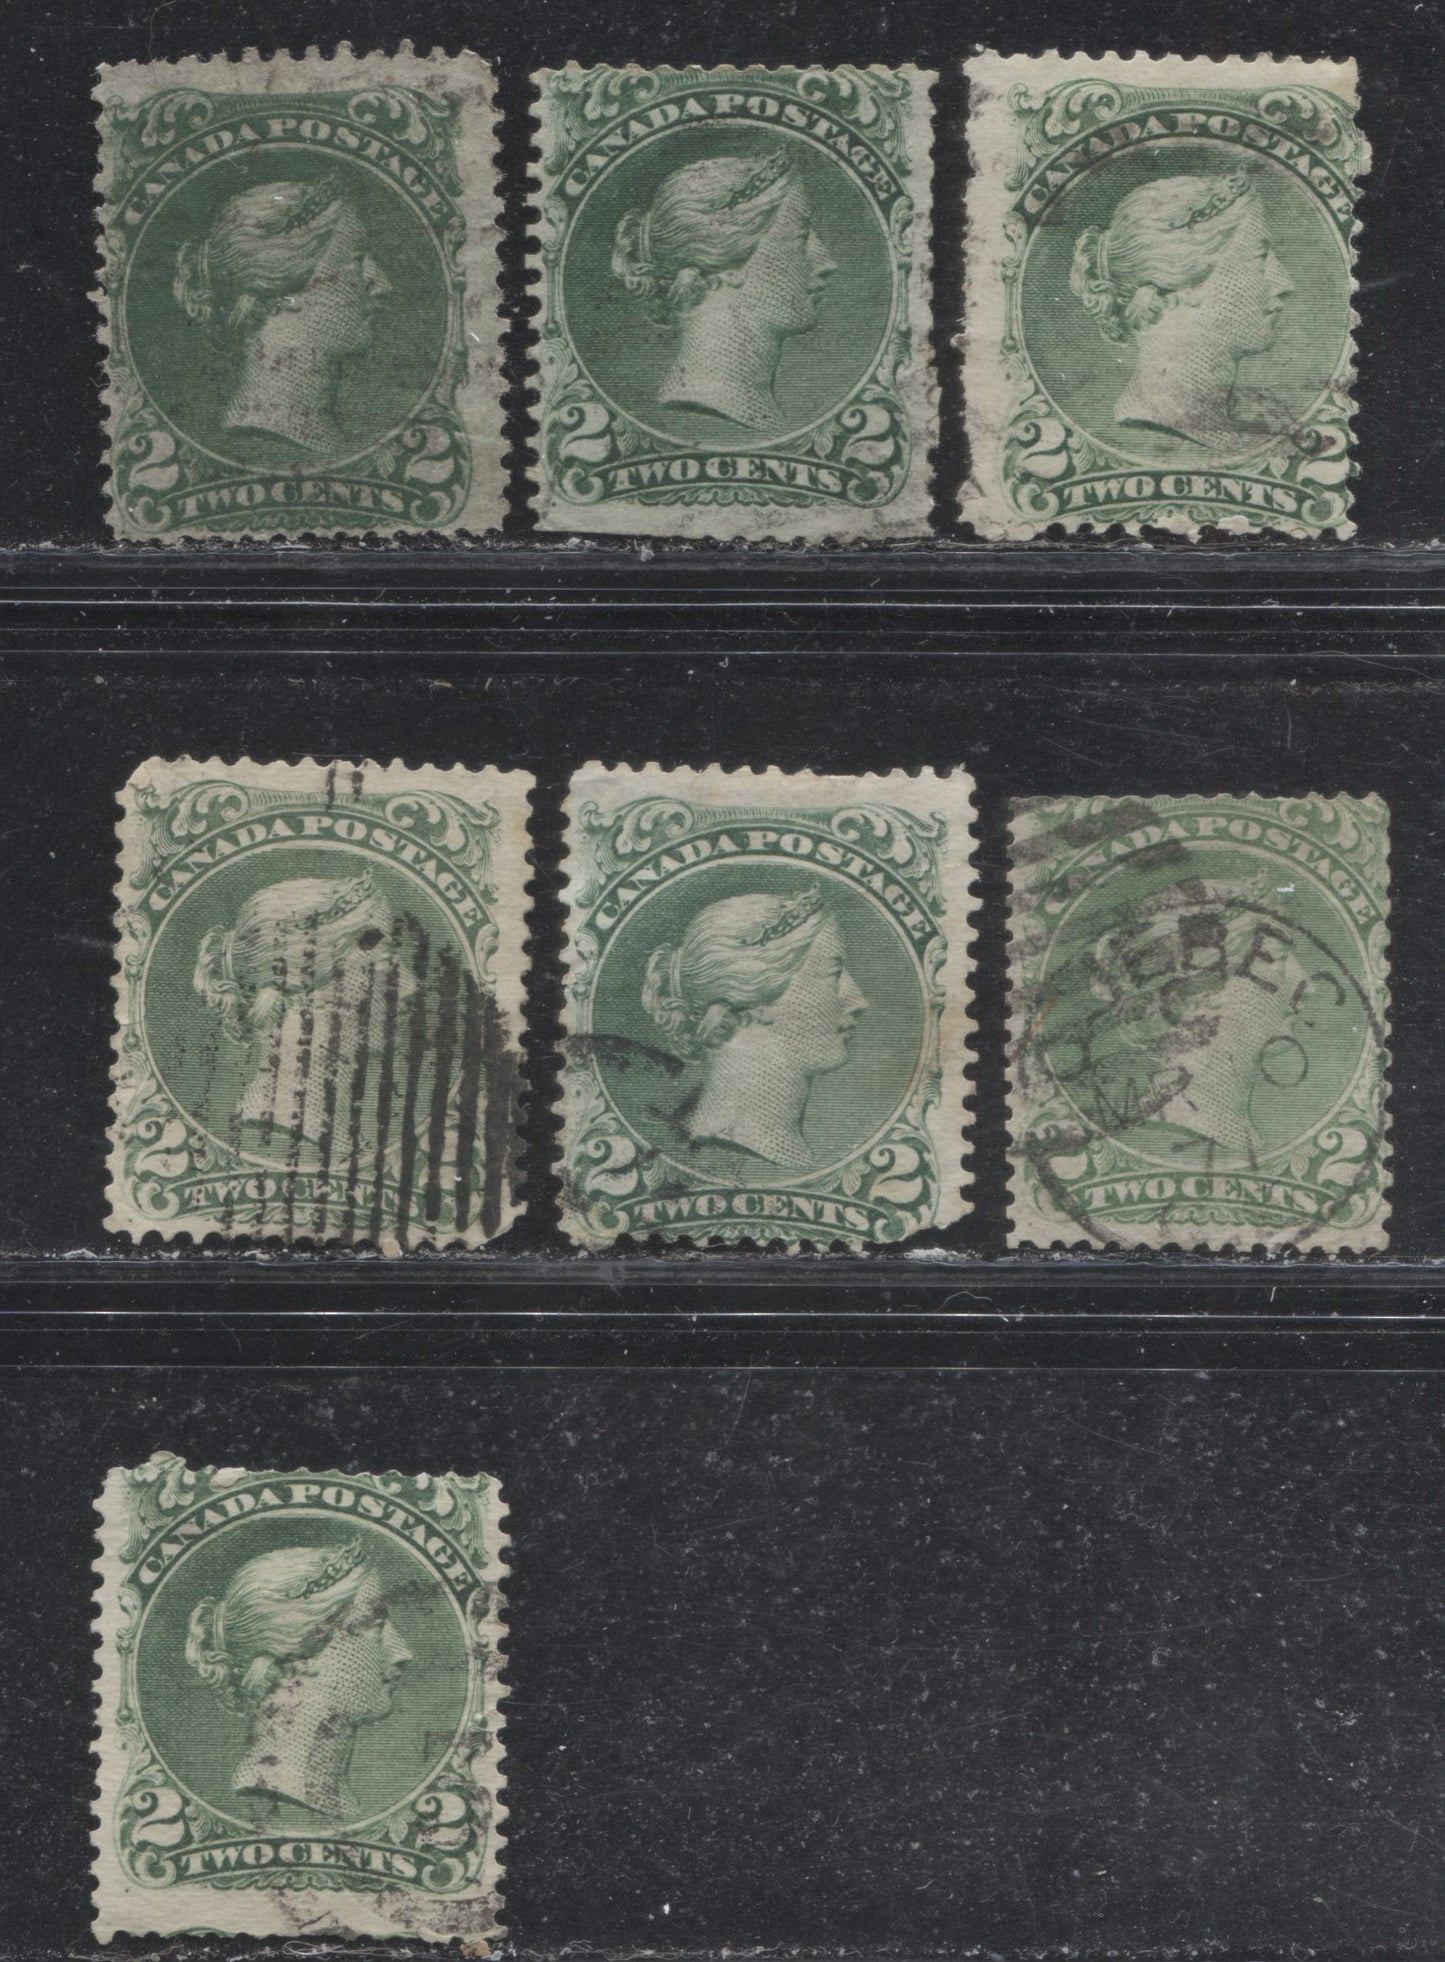 Lot 22 Canada #24 2c Green Queen Victoria, 1868-1897 Large Queen Issue, A Study Lot Of 7 Ungraded Used Singles With Different Shades And Papers